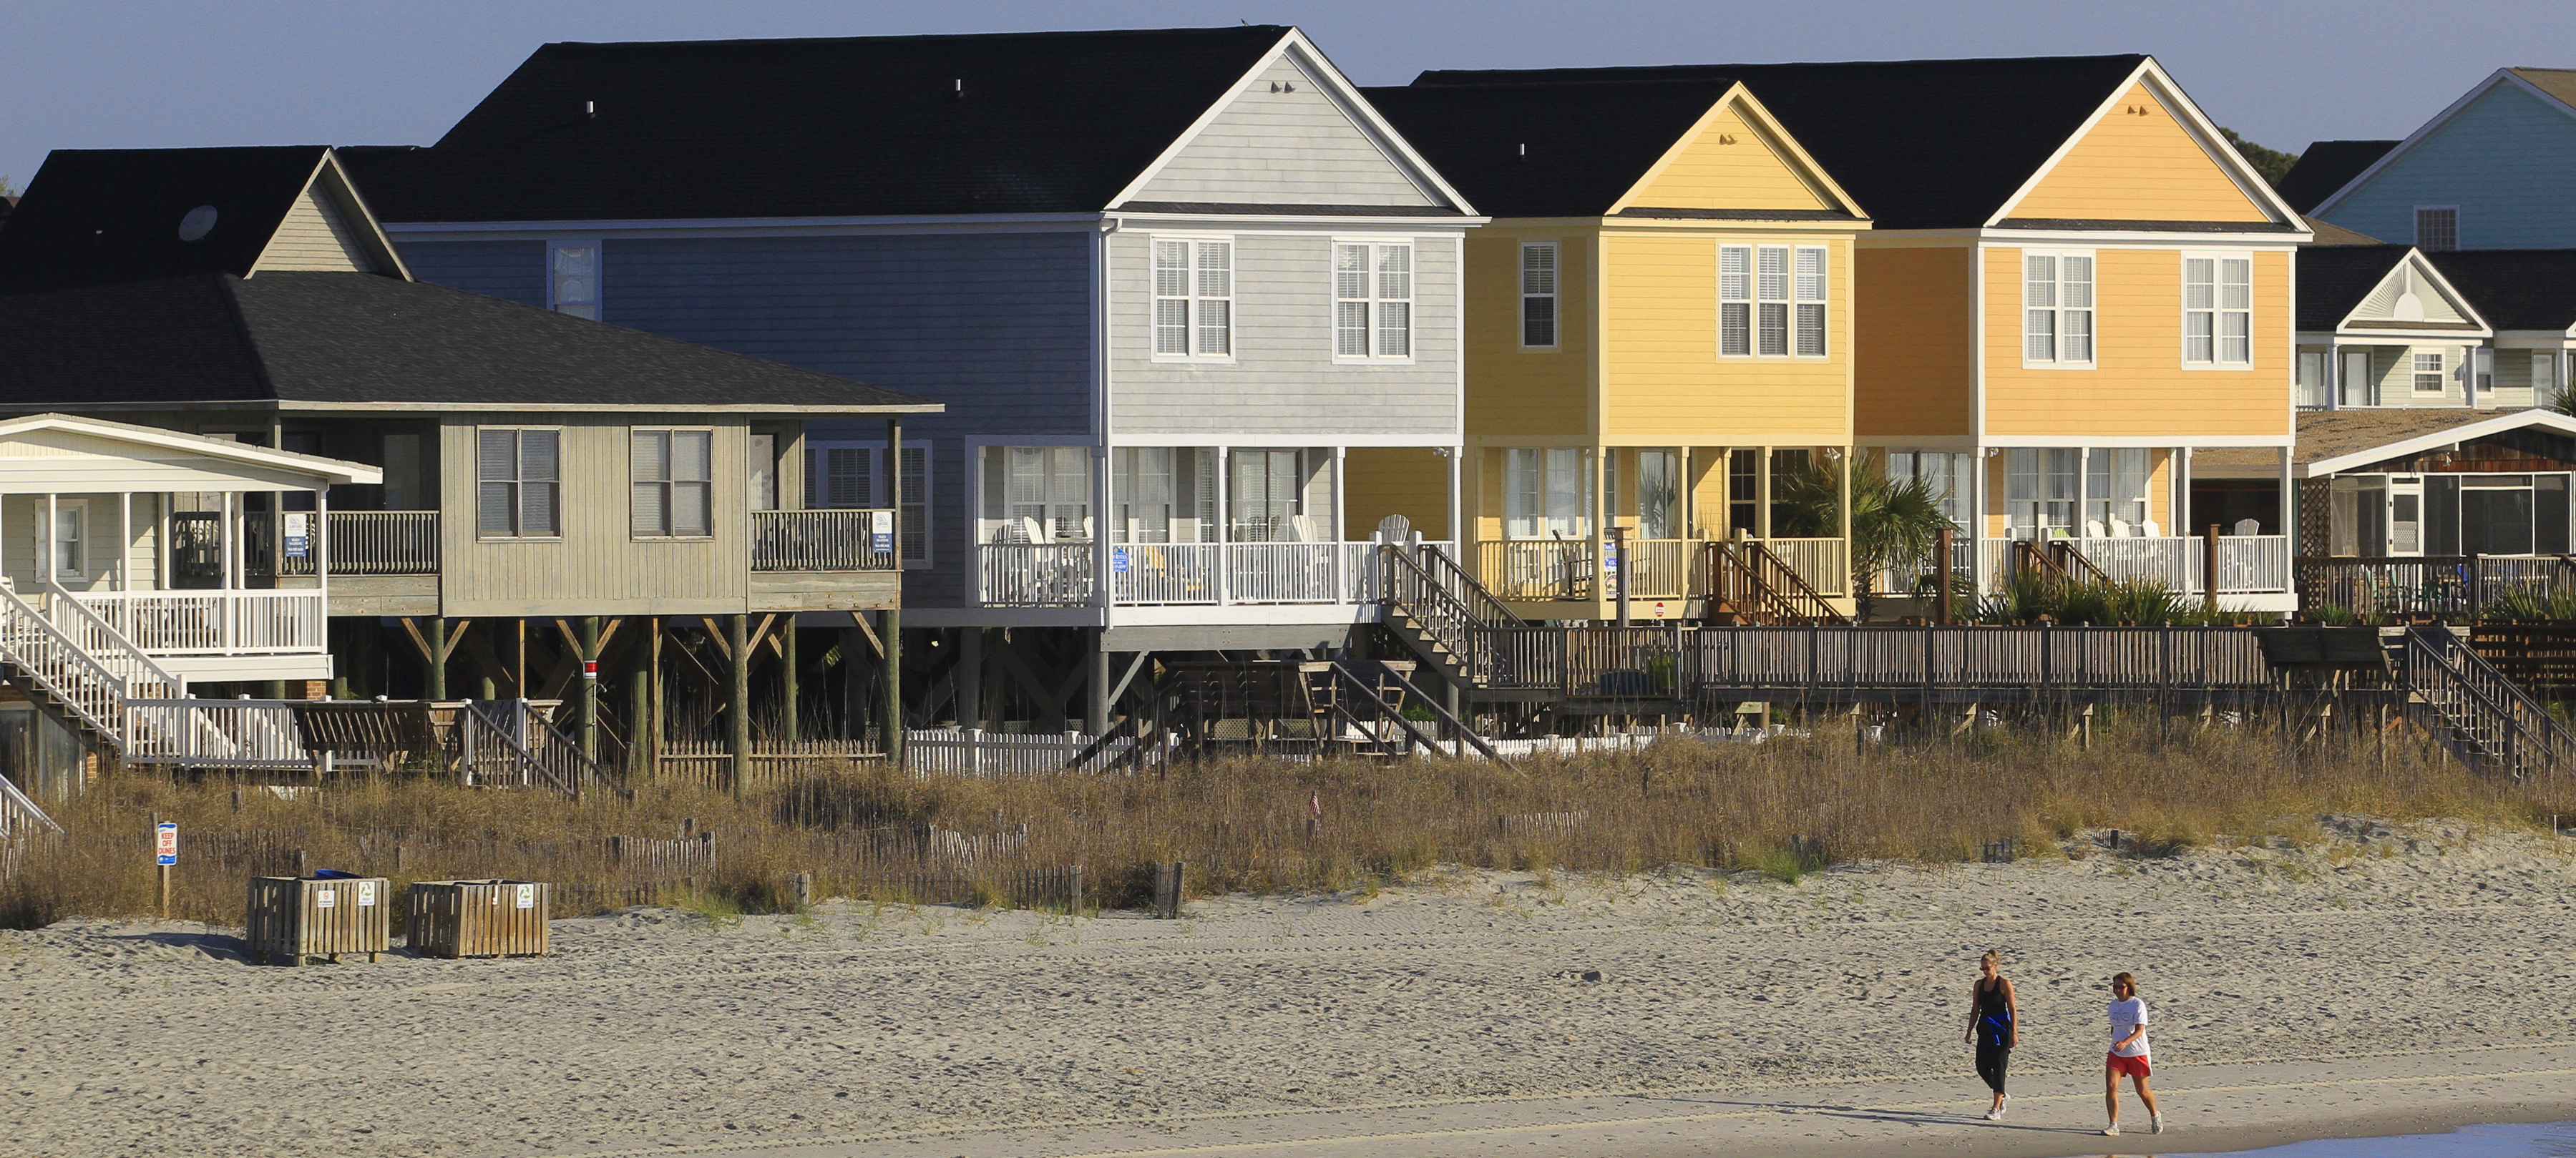 10 Vacation Rentals around Myrtle Beach you have to see!